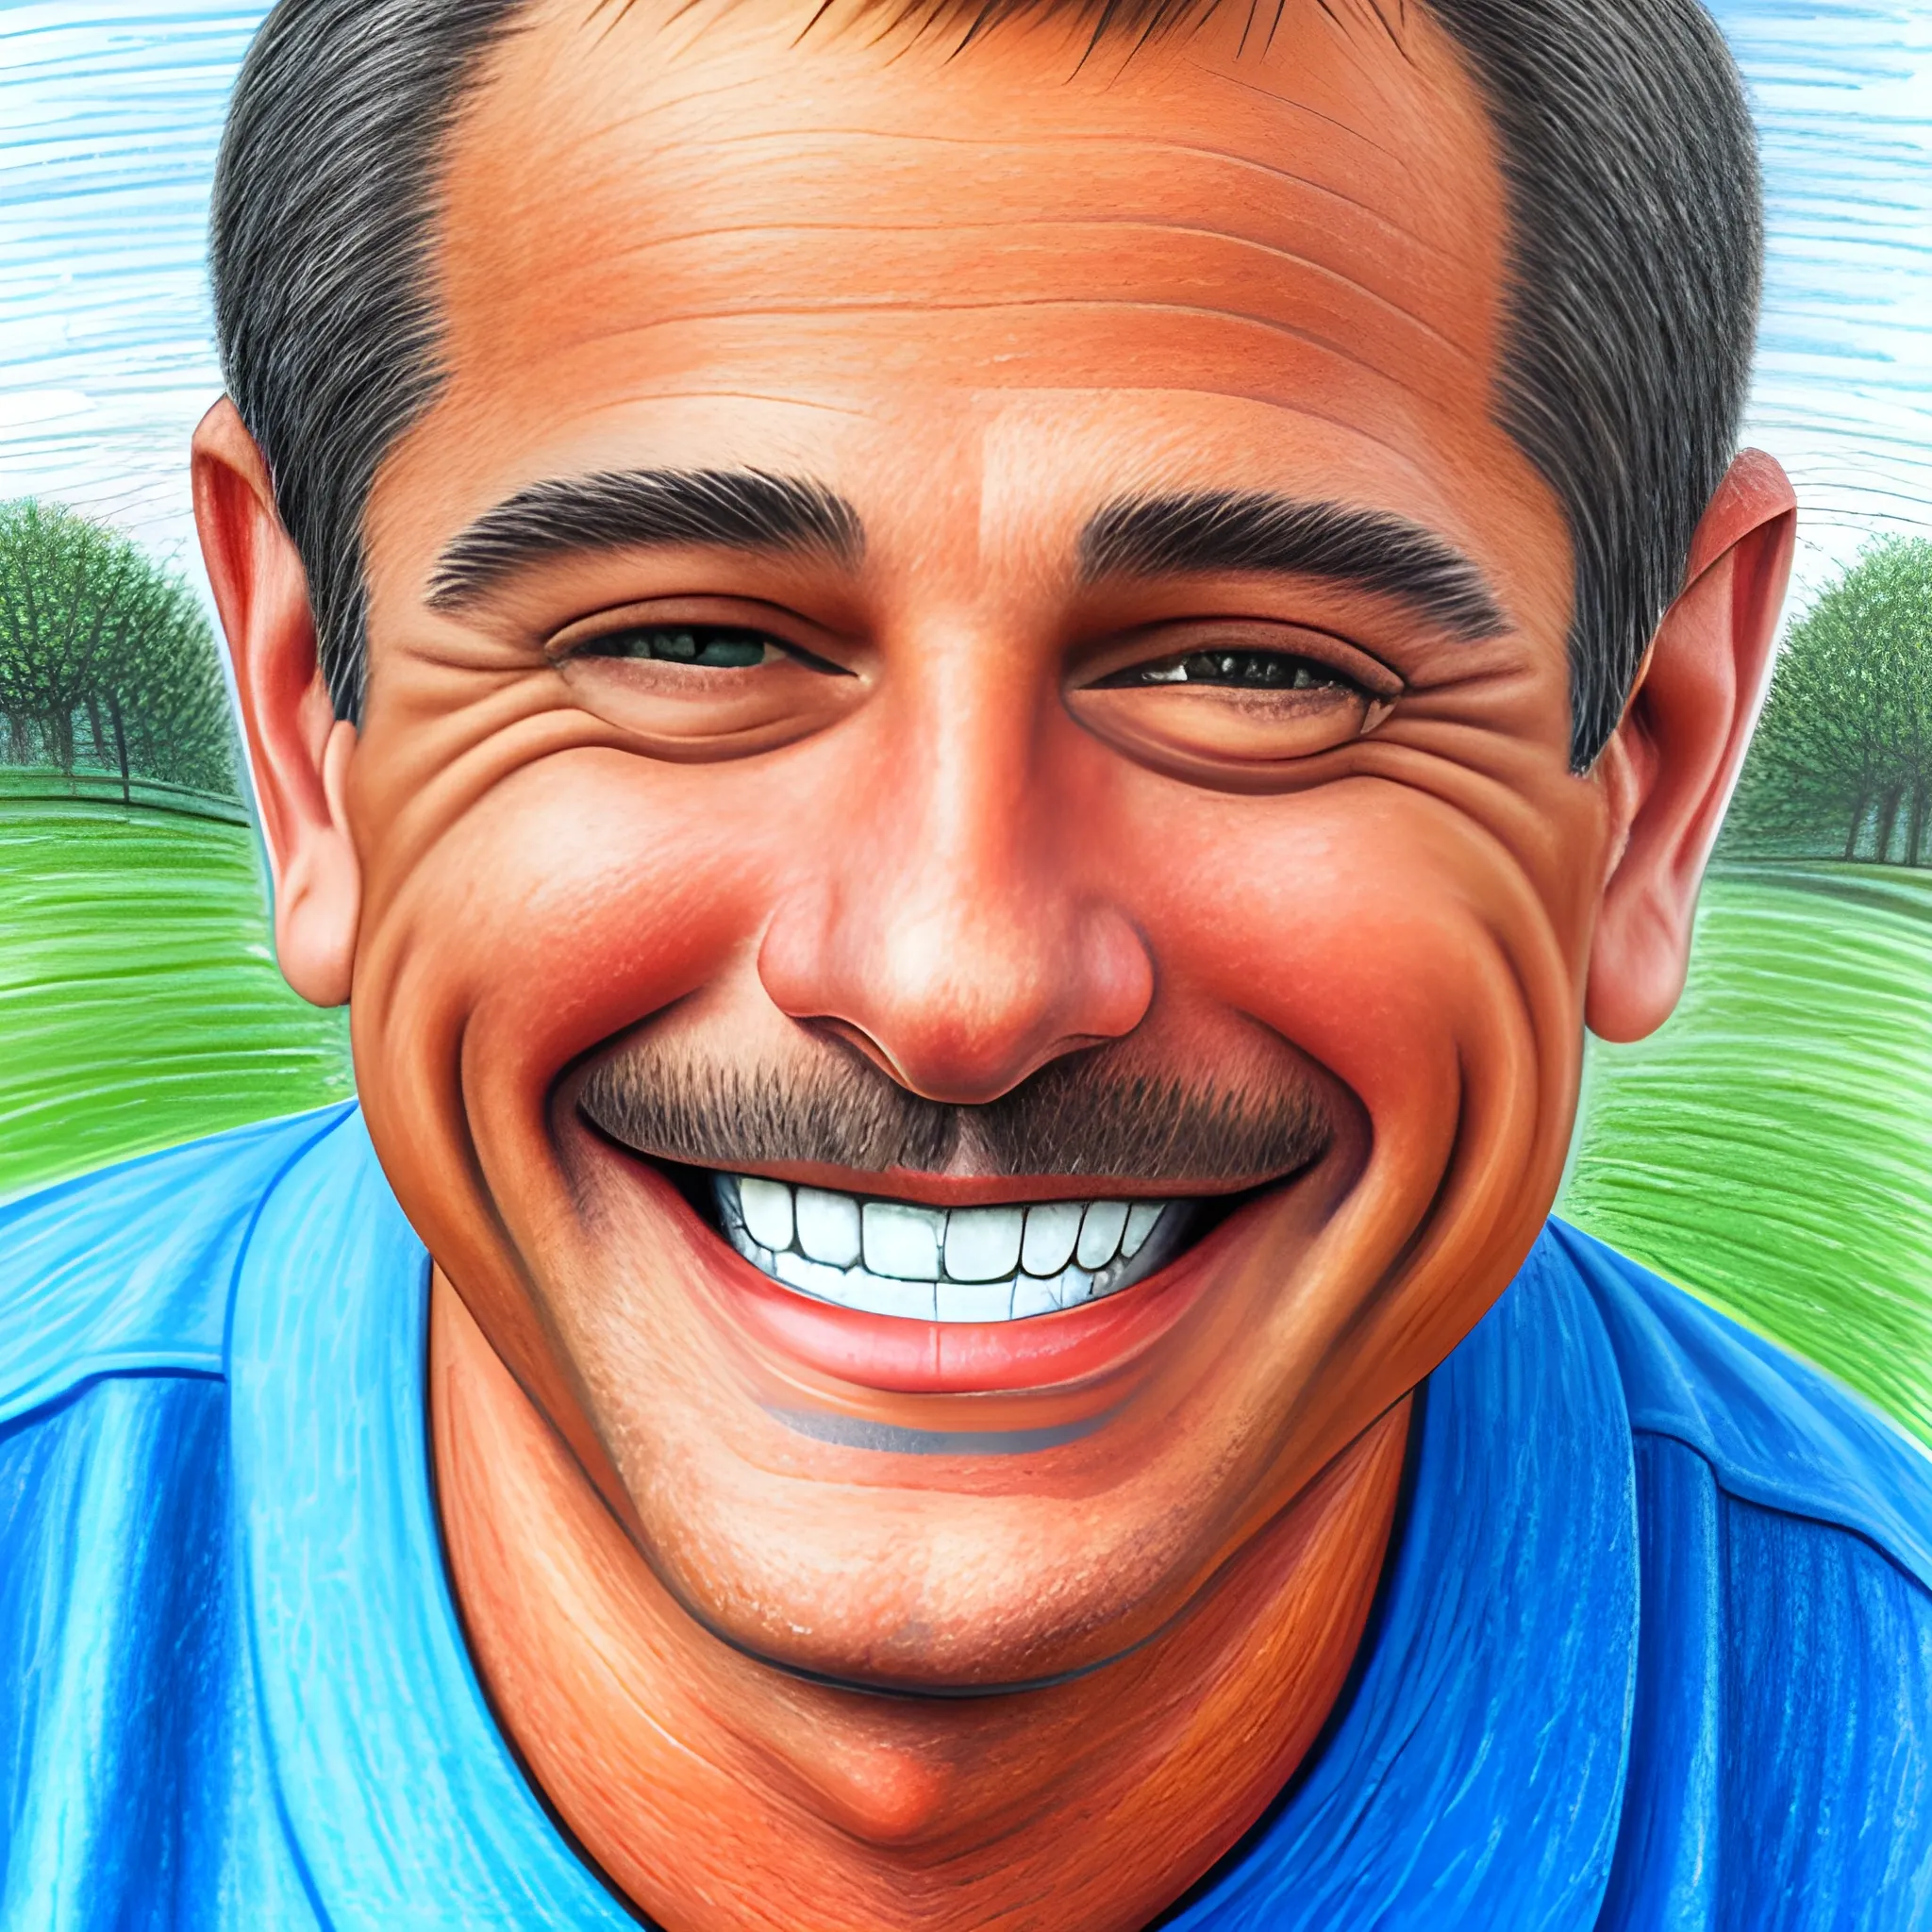 color pencil sketch of a happy smiling latin man facing the camera, wearing a blue golf shirt
